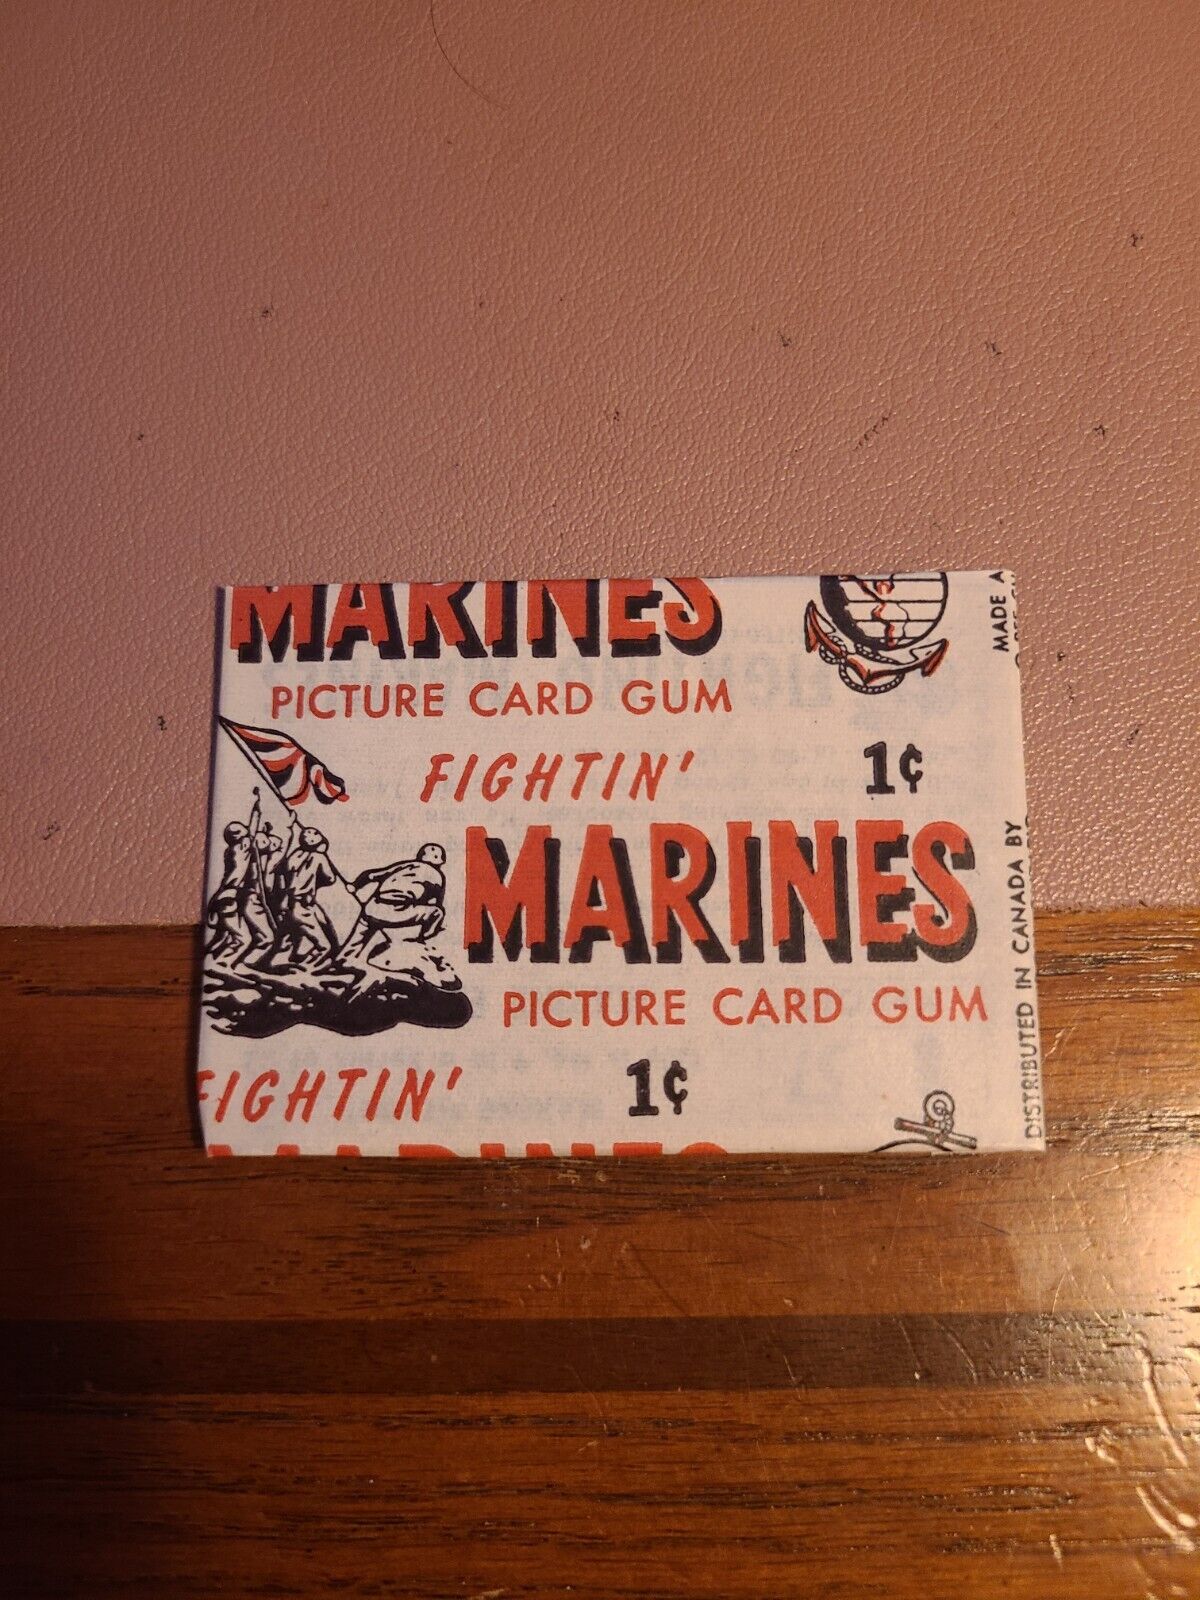 1953 Topps Fighting Marines Sealed Unopened 1 Cent Wax Pack - Beautiful